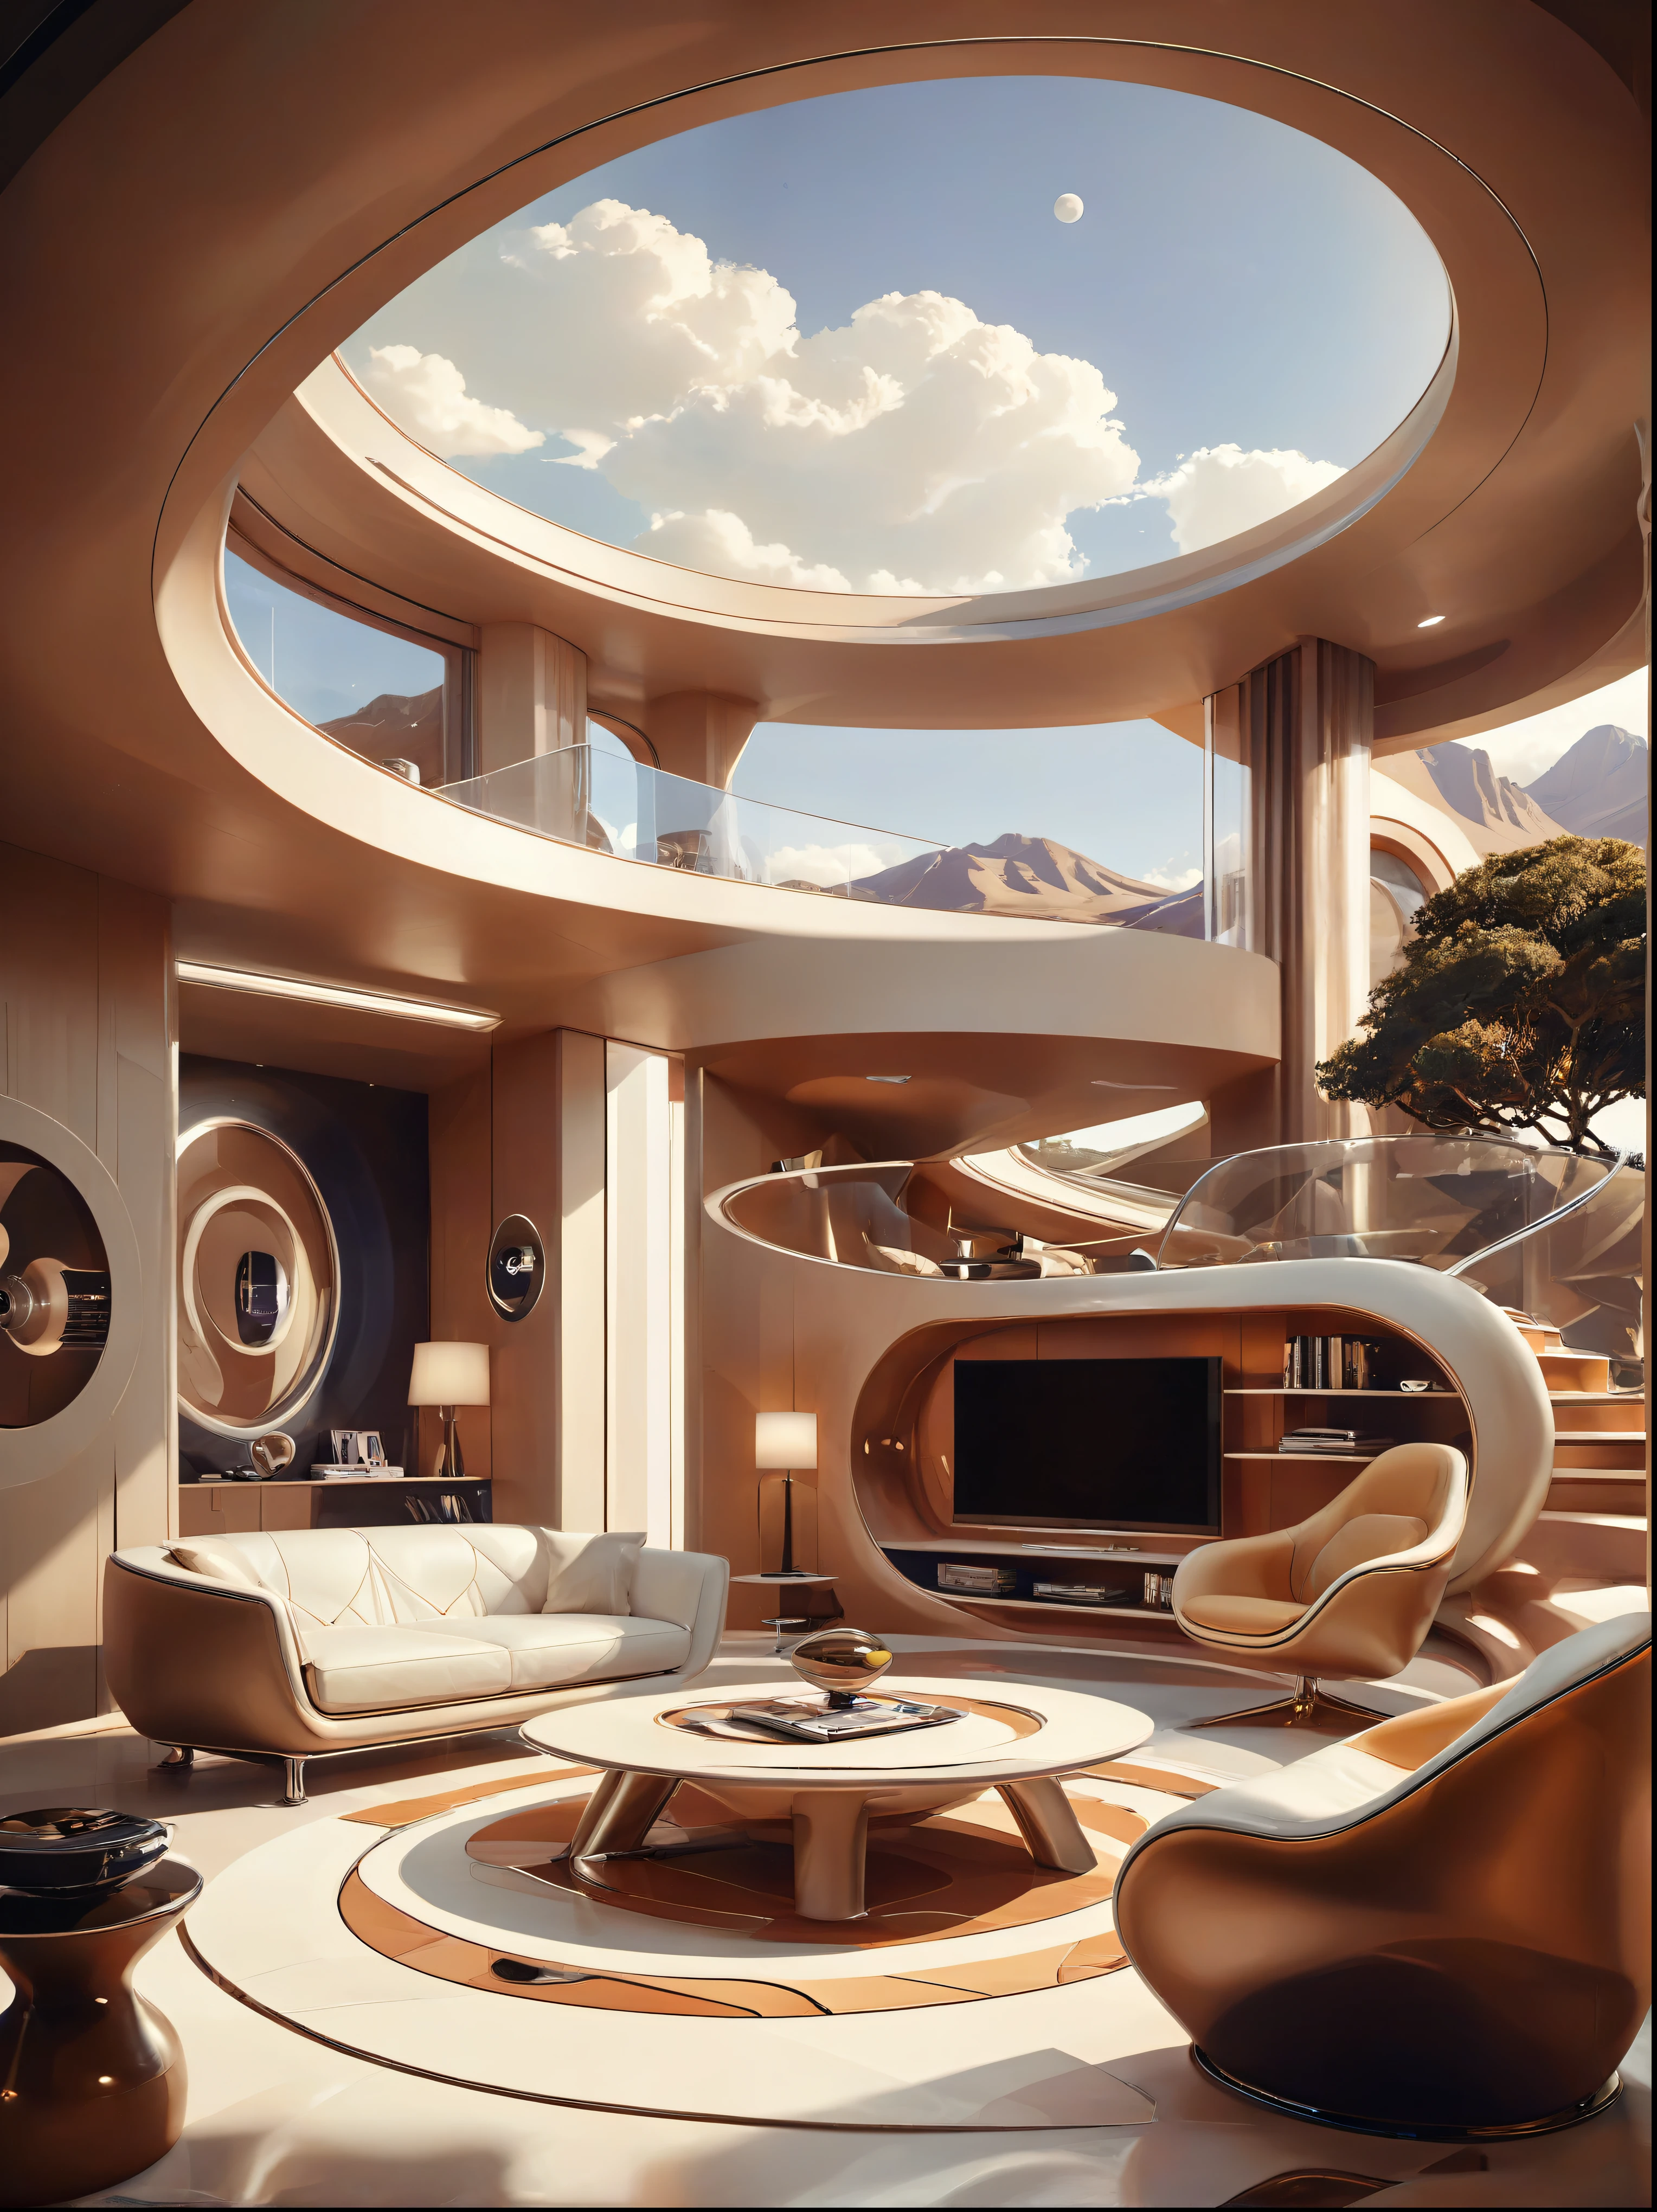 Living room study concept for futuristic home incorporates organic fluidity、Circles and geometric shapes，and use artistic imagination to render houses and landscapes, 